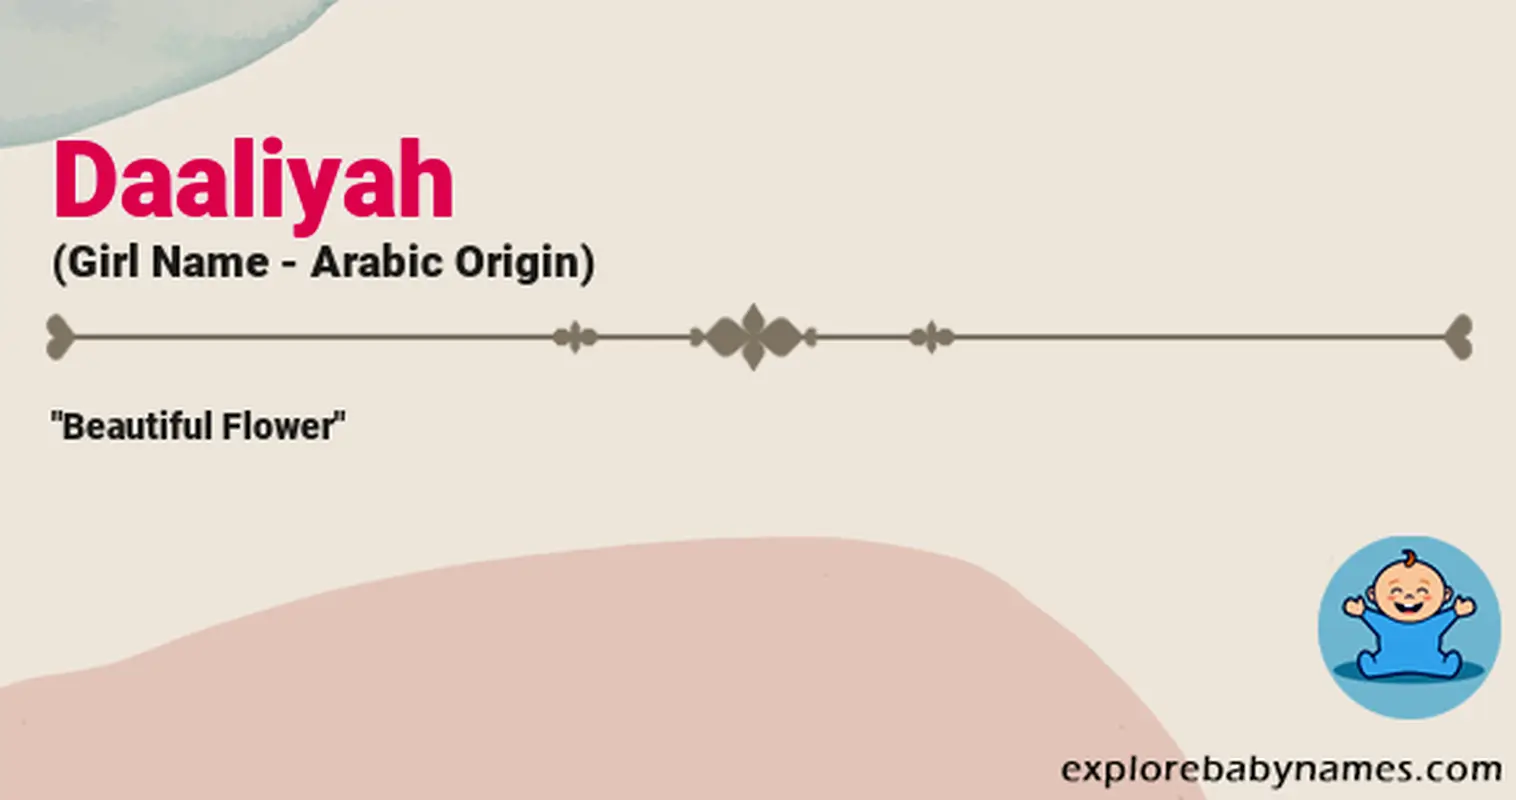 Meaning of Daaliyah